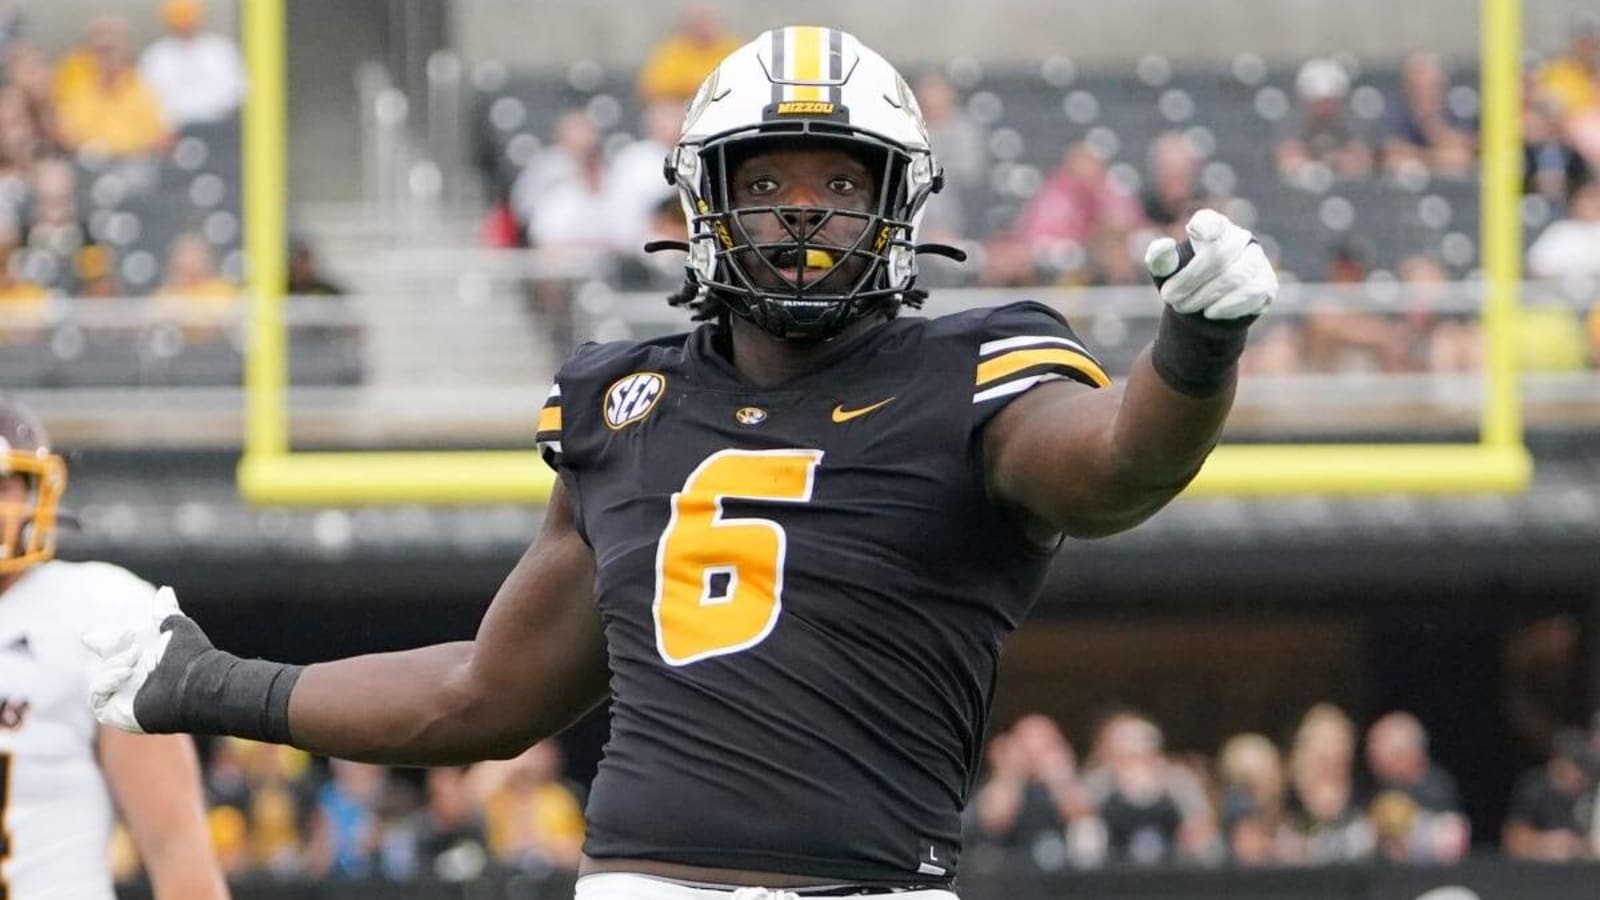 Mizzou Minute: Which Former Tiger had the Best Senior Bowl Showing?